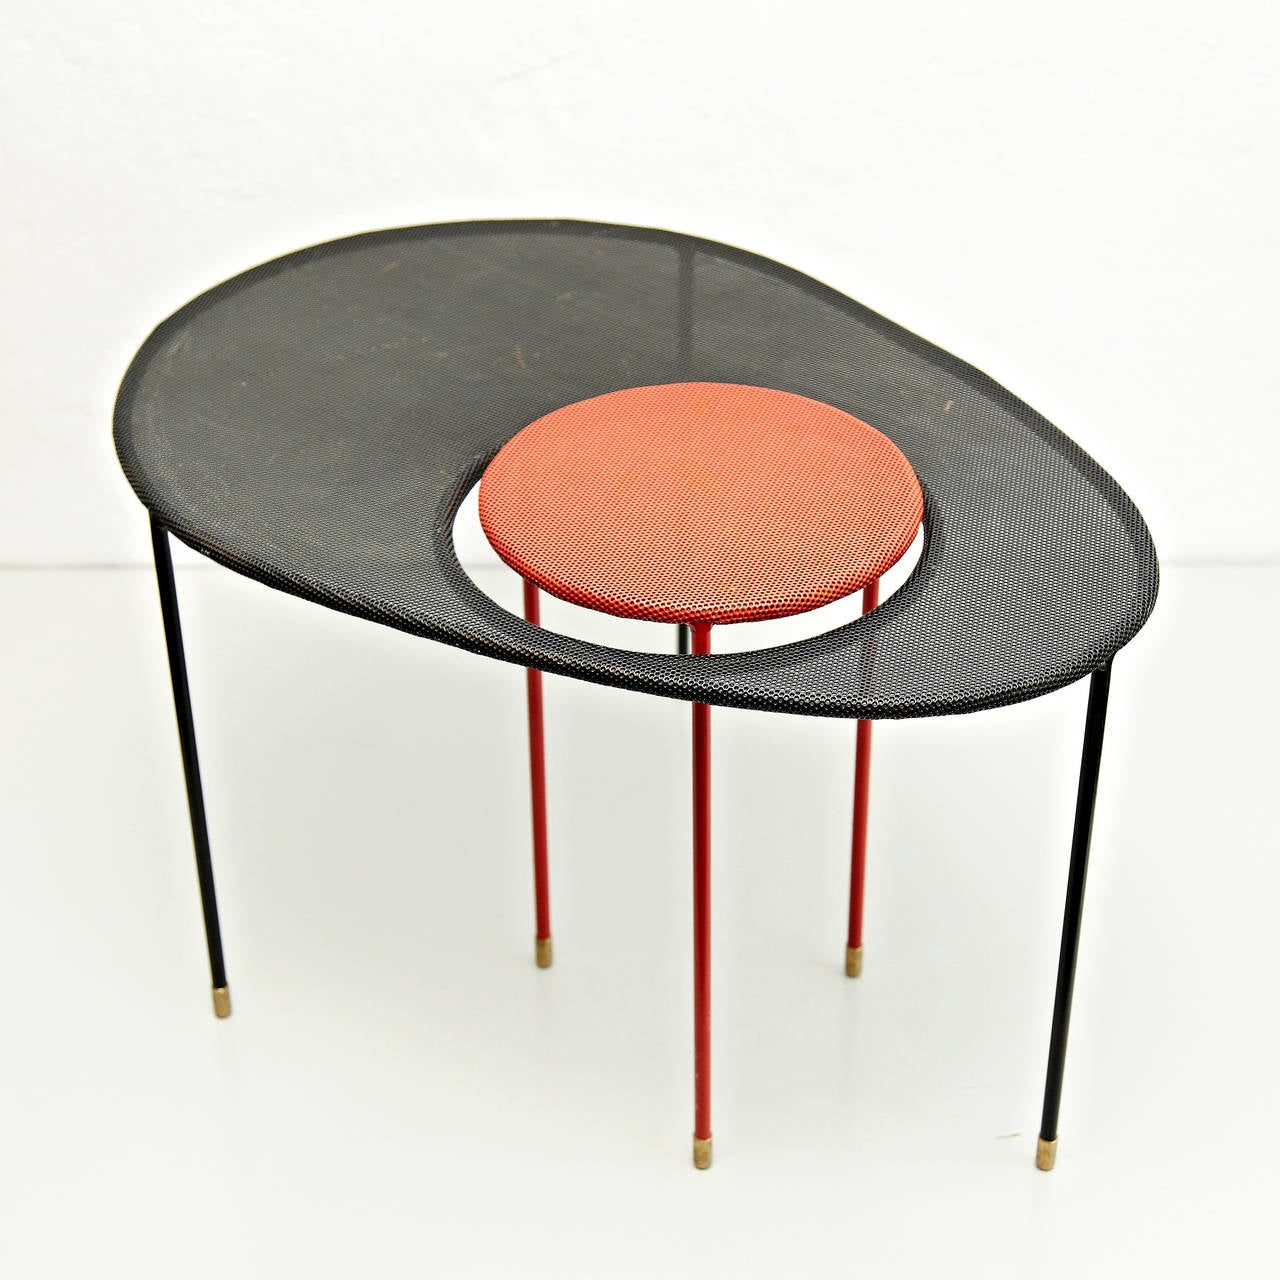 Nesting tables, model Kangourou, designed by Mathieu Matégot.
Manufactured by his son Patrice Matégot, France, circa 2000 before it went into production again.
Folded, perforated metal, lacquered in red and black.

In good original condition,